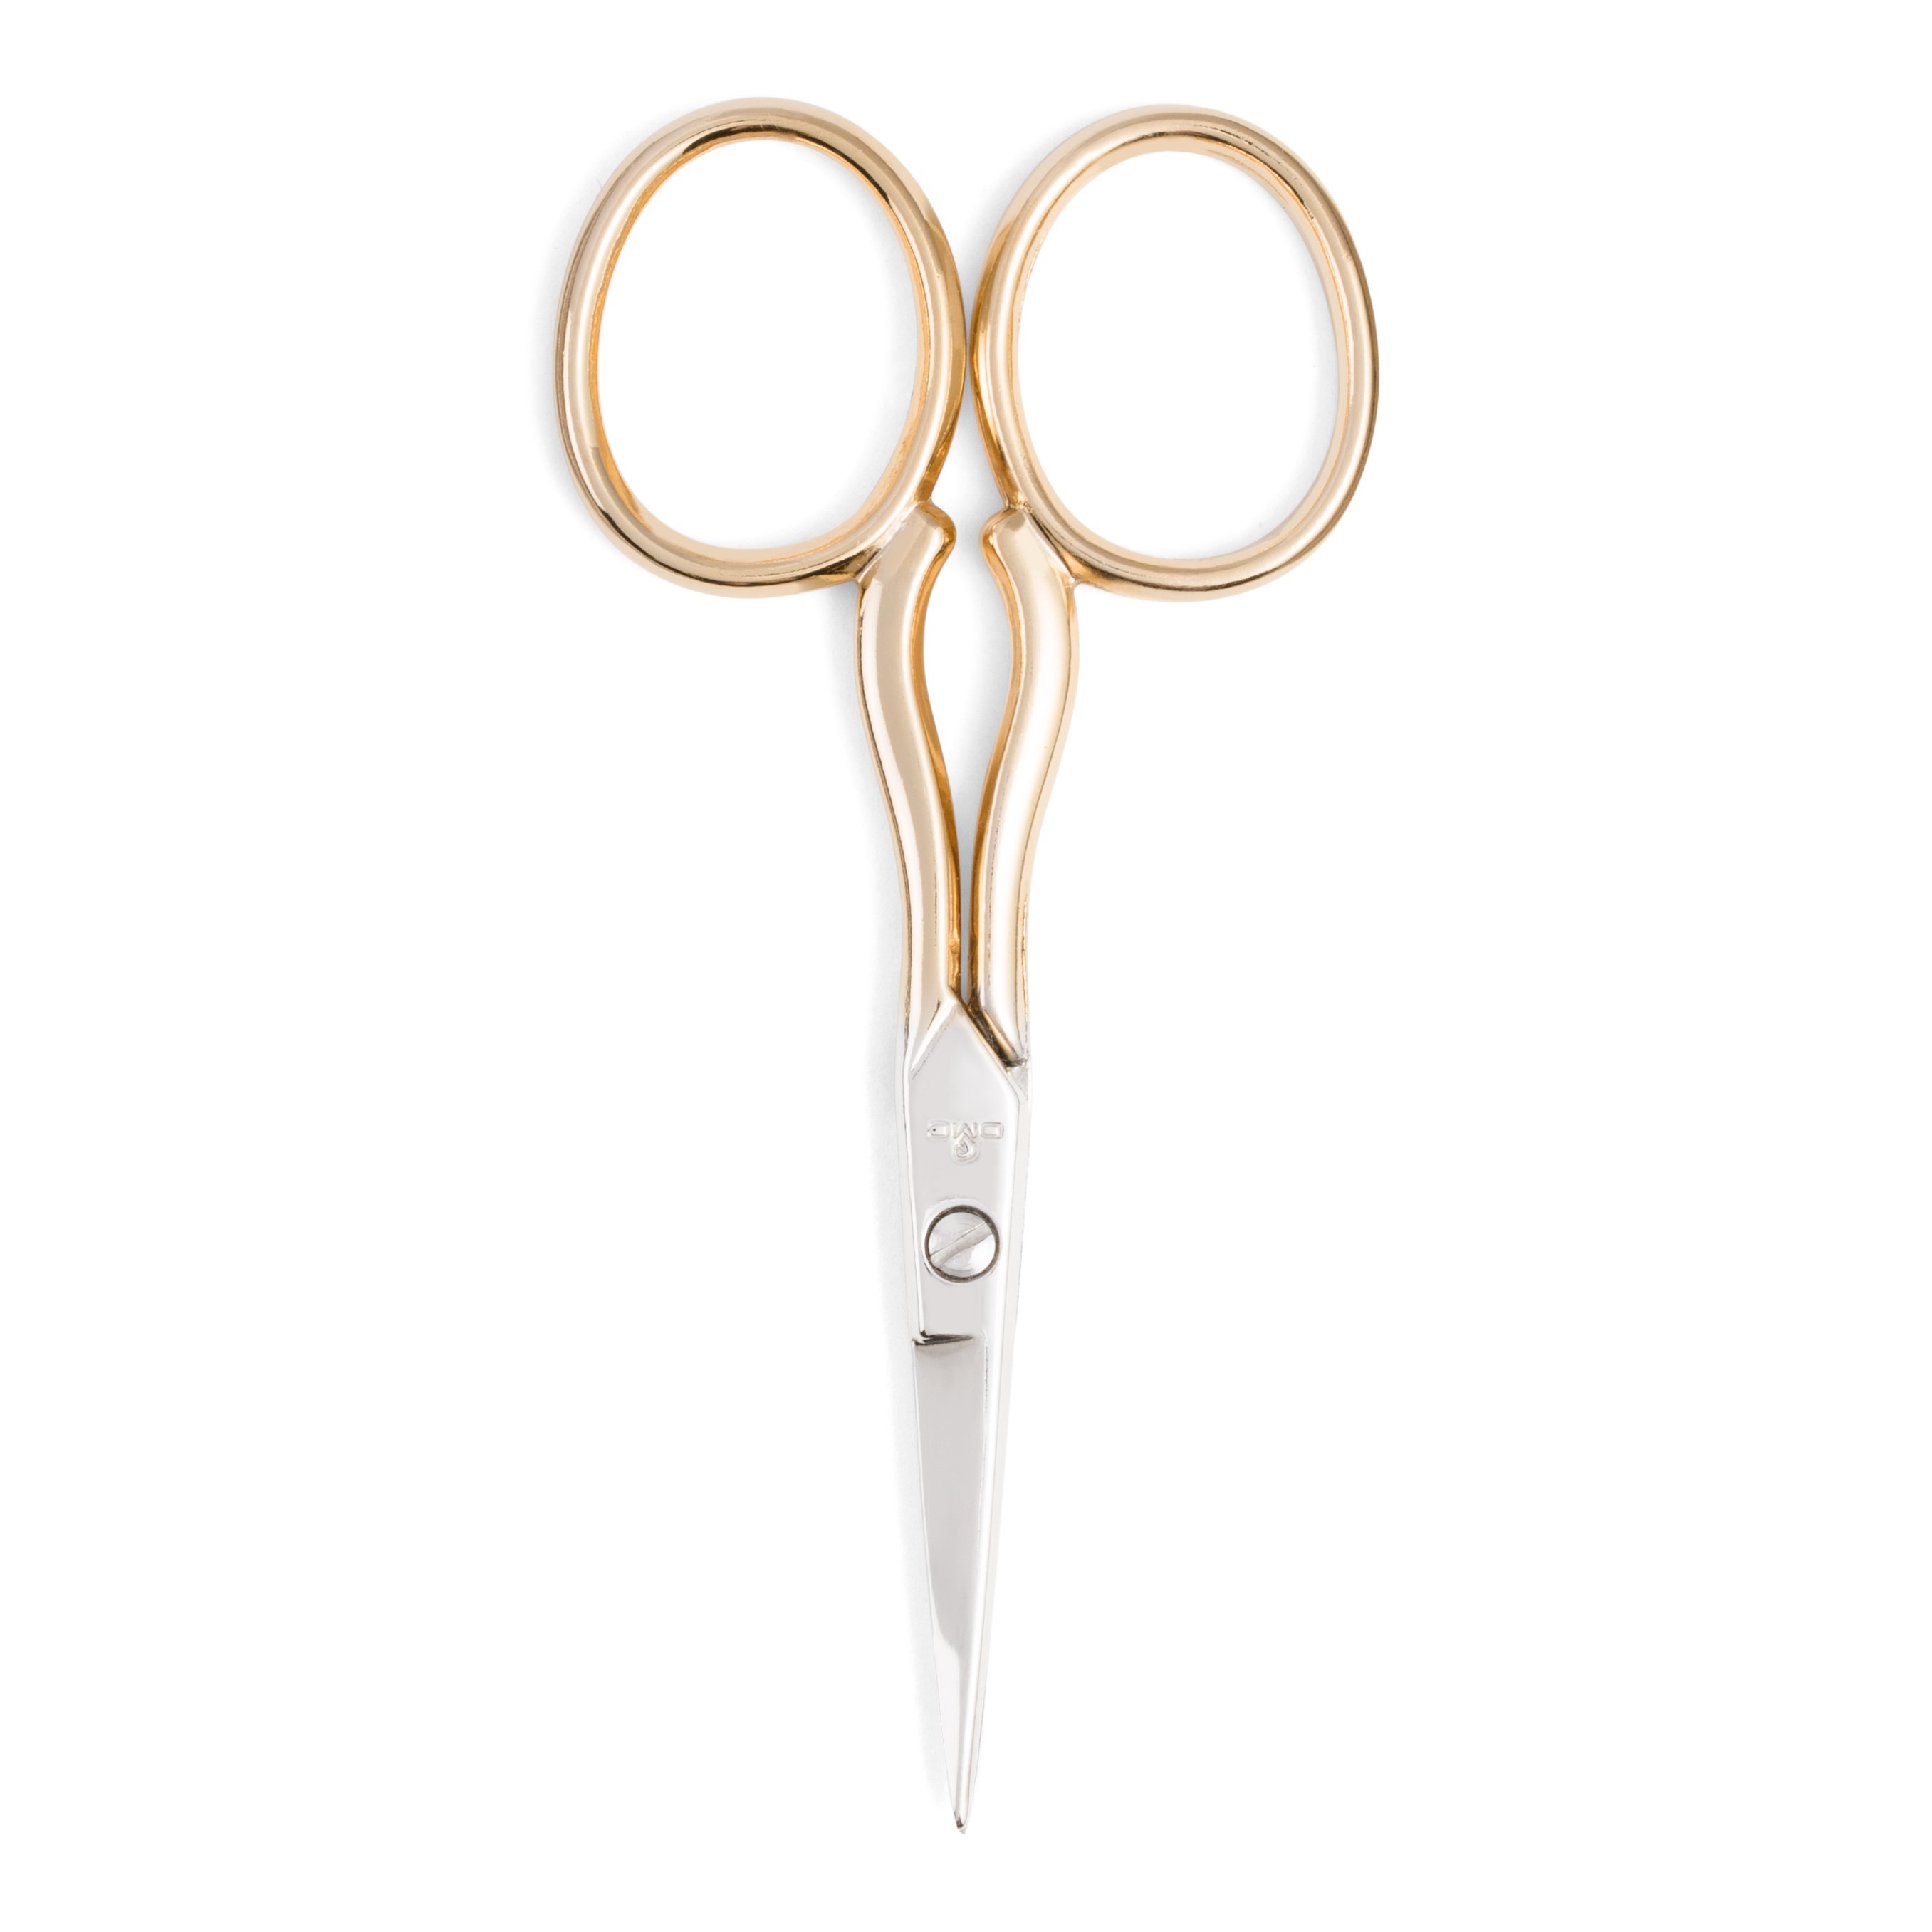 DMC Peacock Embroidery Scissors 3 3//4/" Gold plated handle Italy